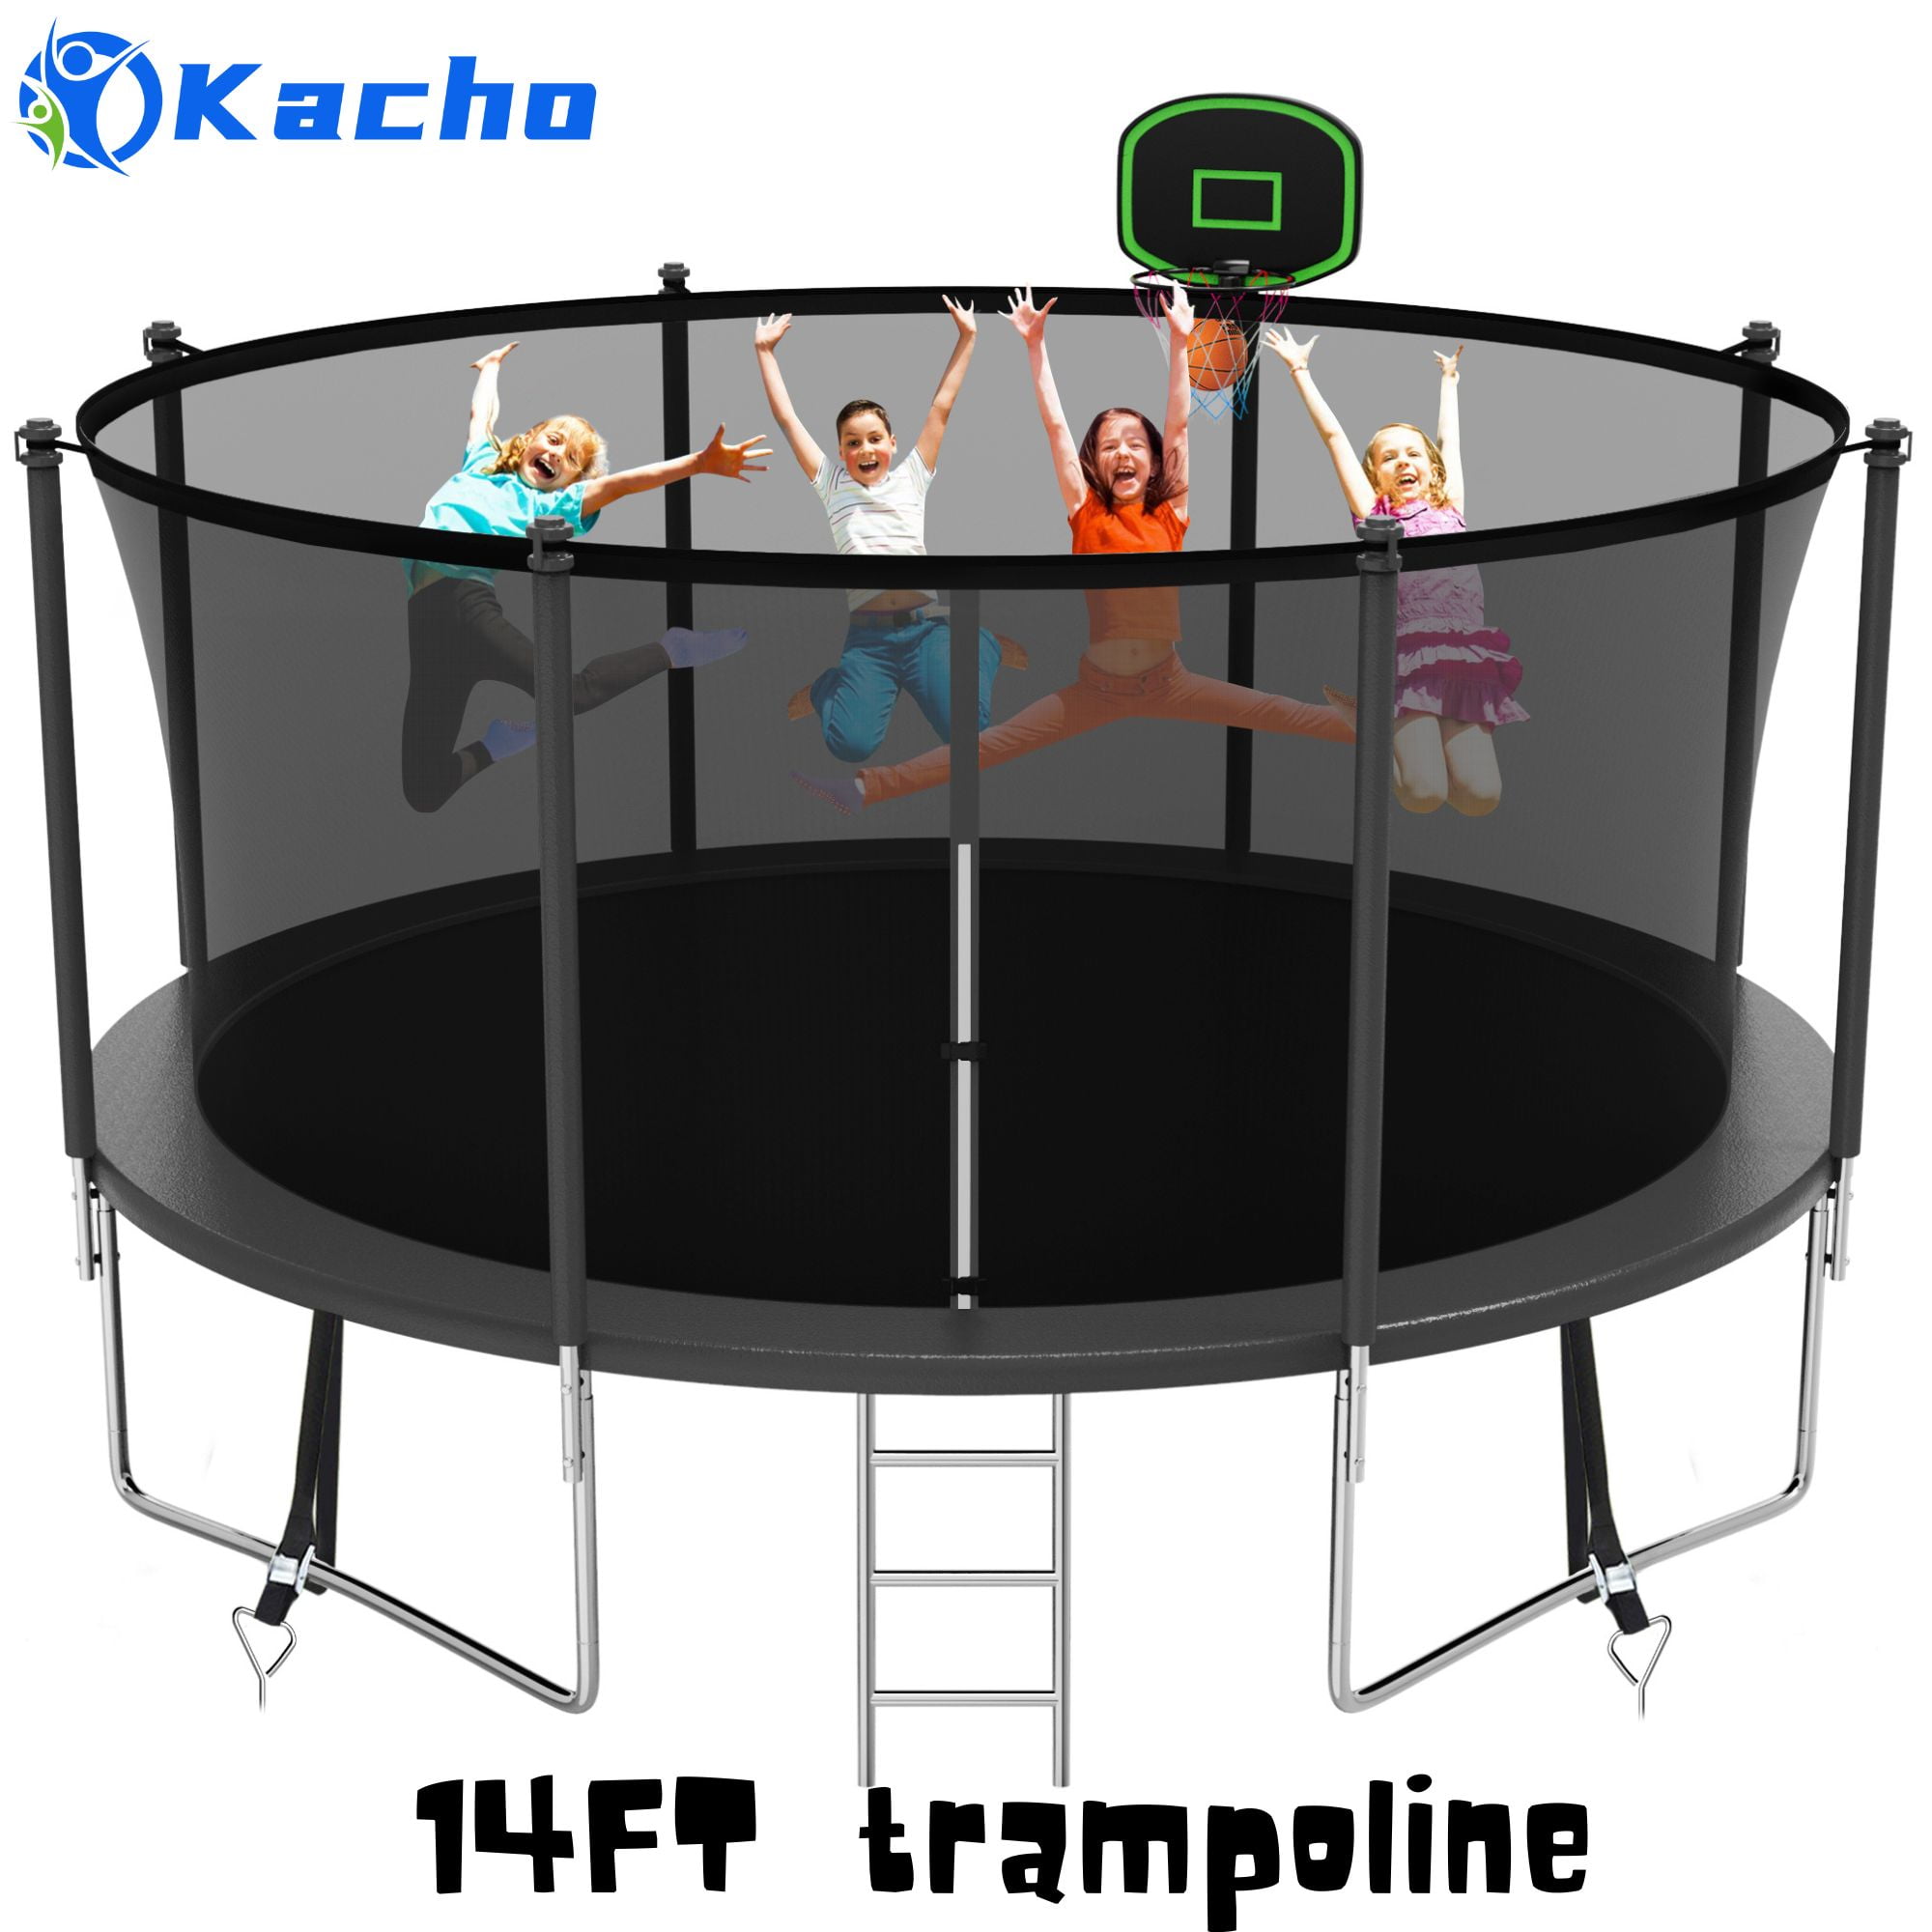 Kacho Trampoline for Adults Kids 14FT 1400LBS Trampoline with Basketball Hoop, Outdoor Recreational Trampolines, Fully Galvanized Anti-Rust Coating & No Gap ASTM Approved - Walmart.com